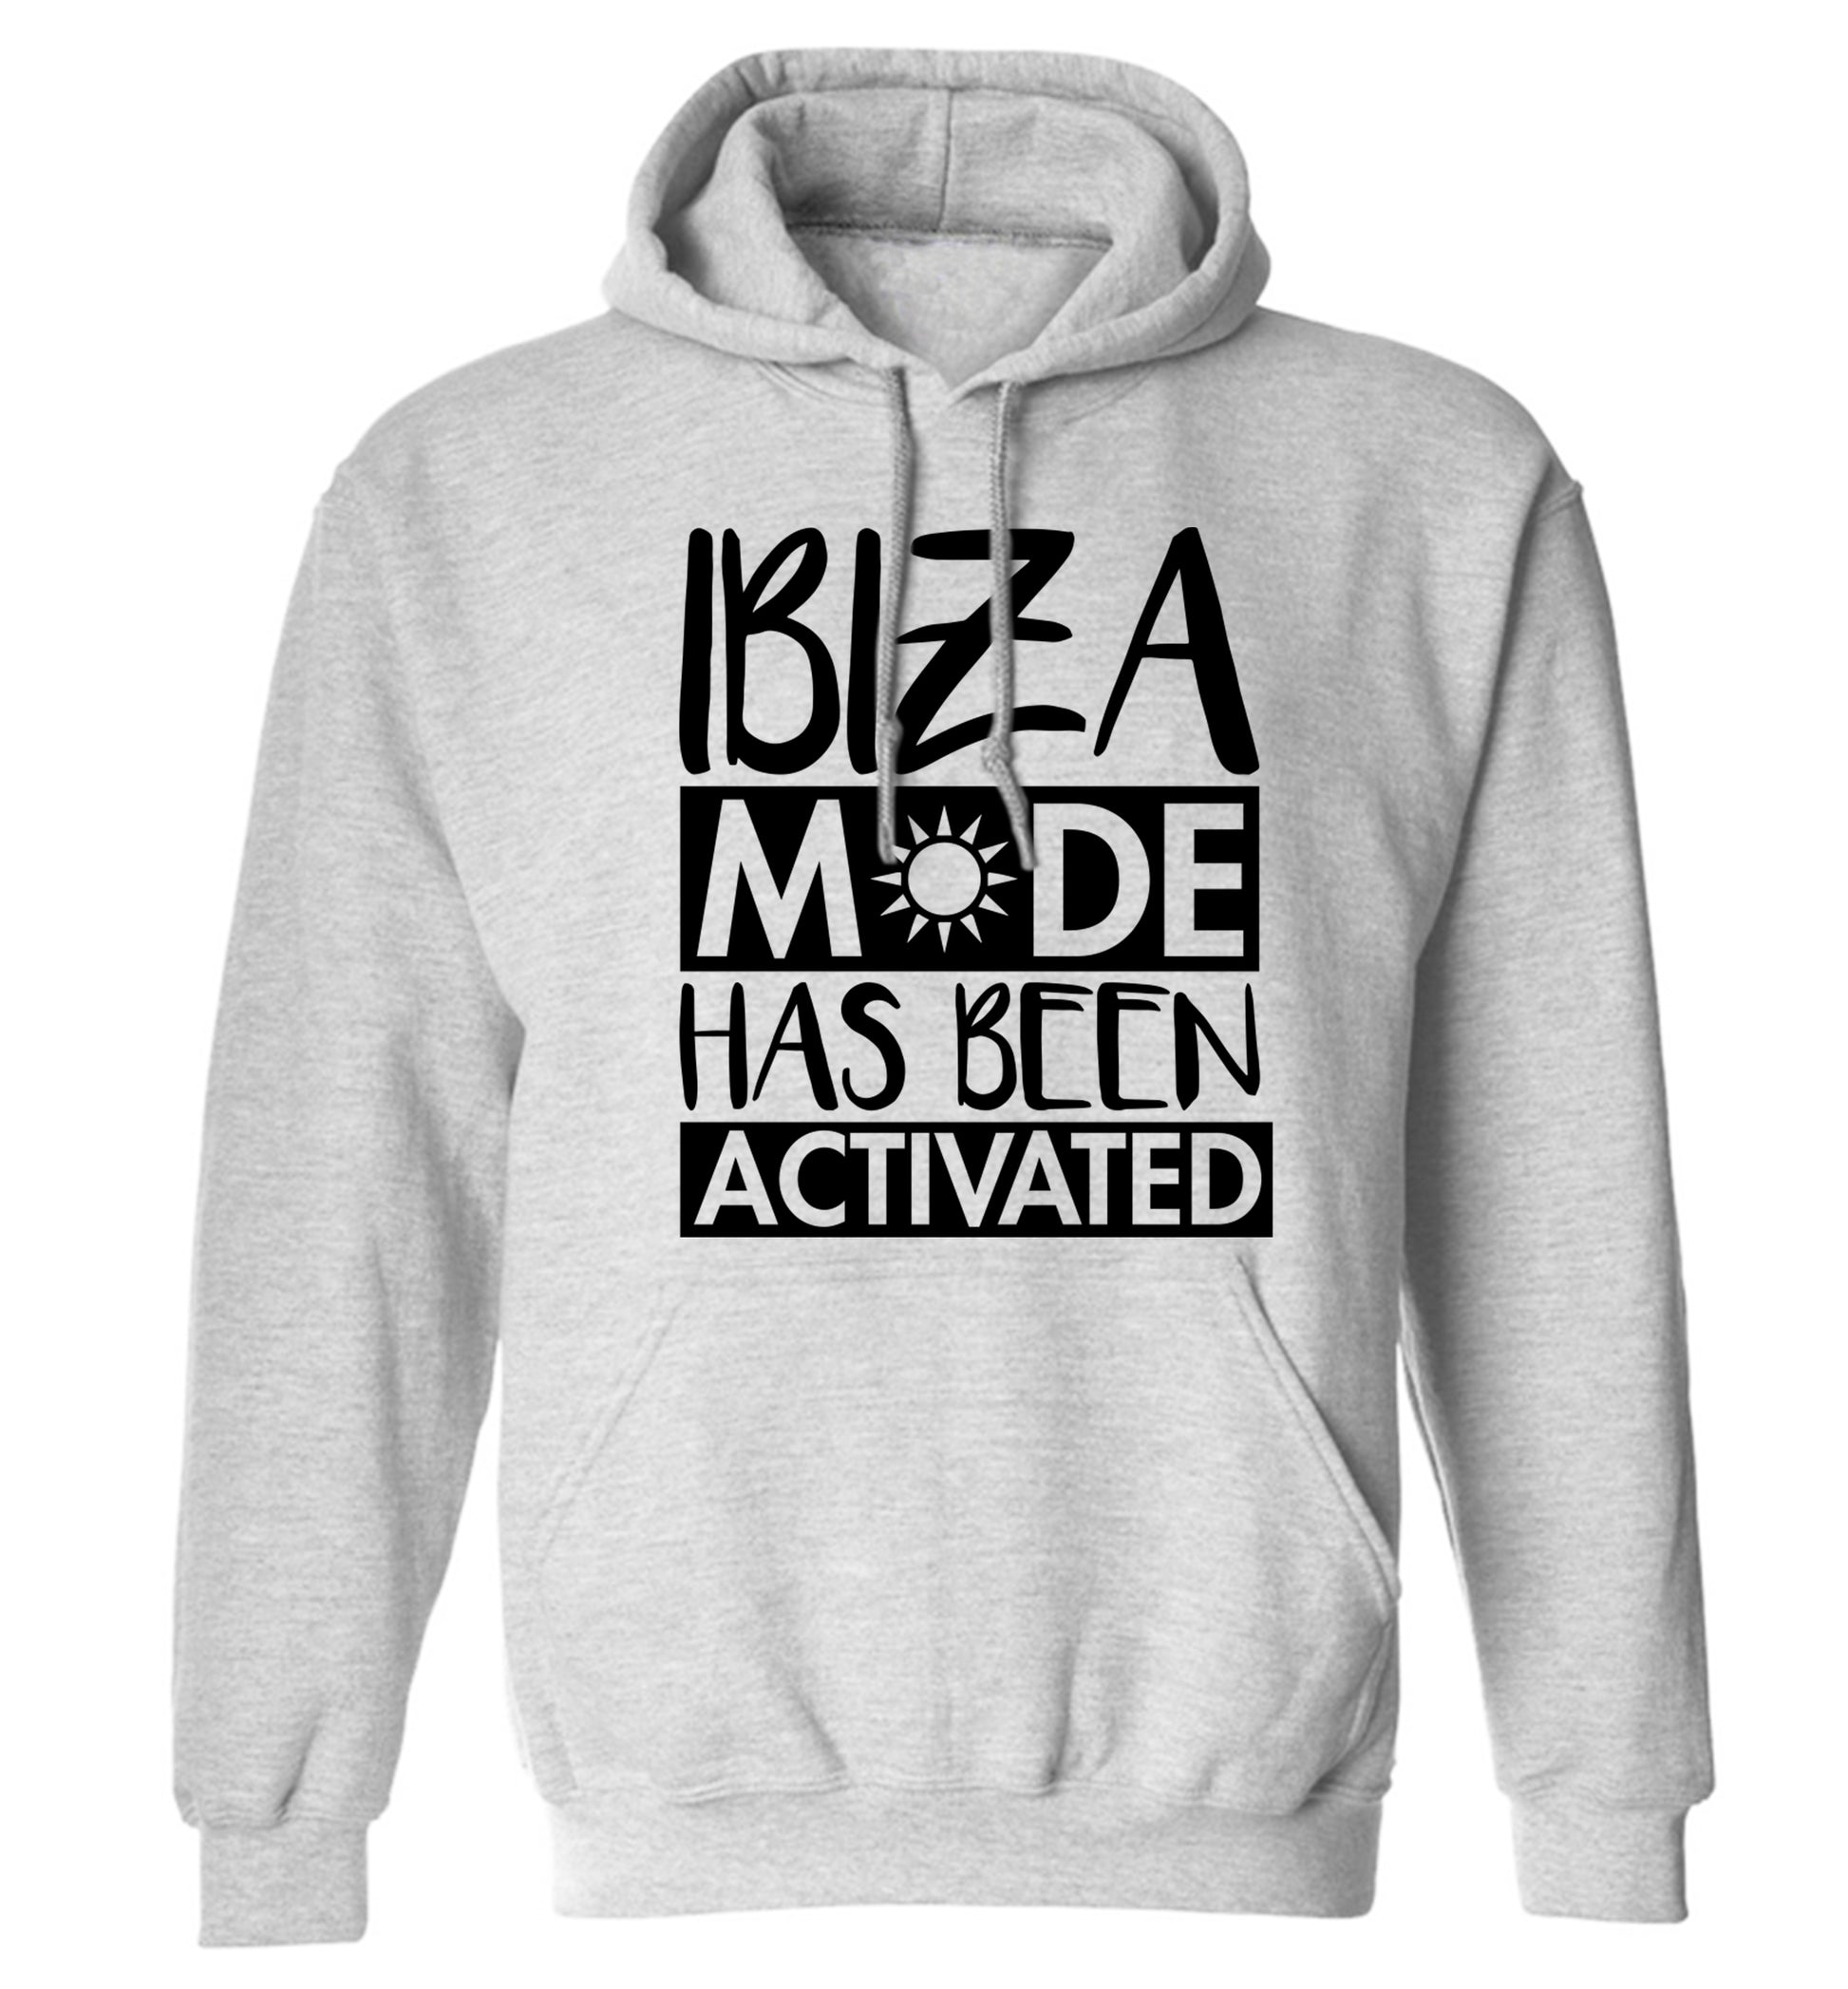 Ibiza mode has been activated adults unisex grey hoodie 2XL